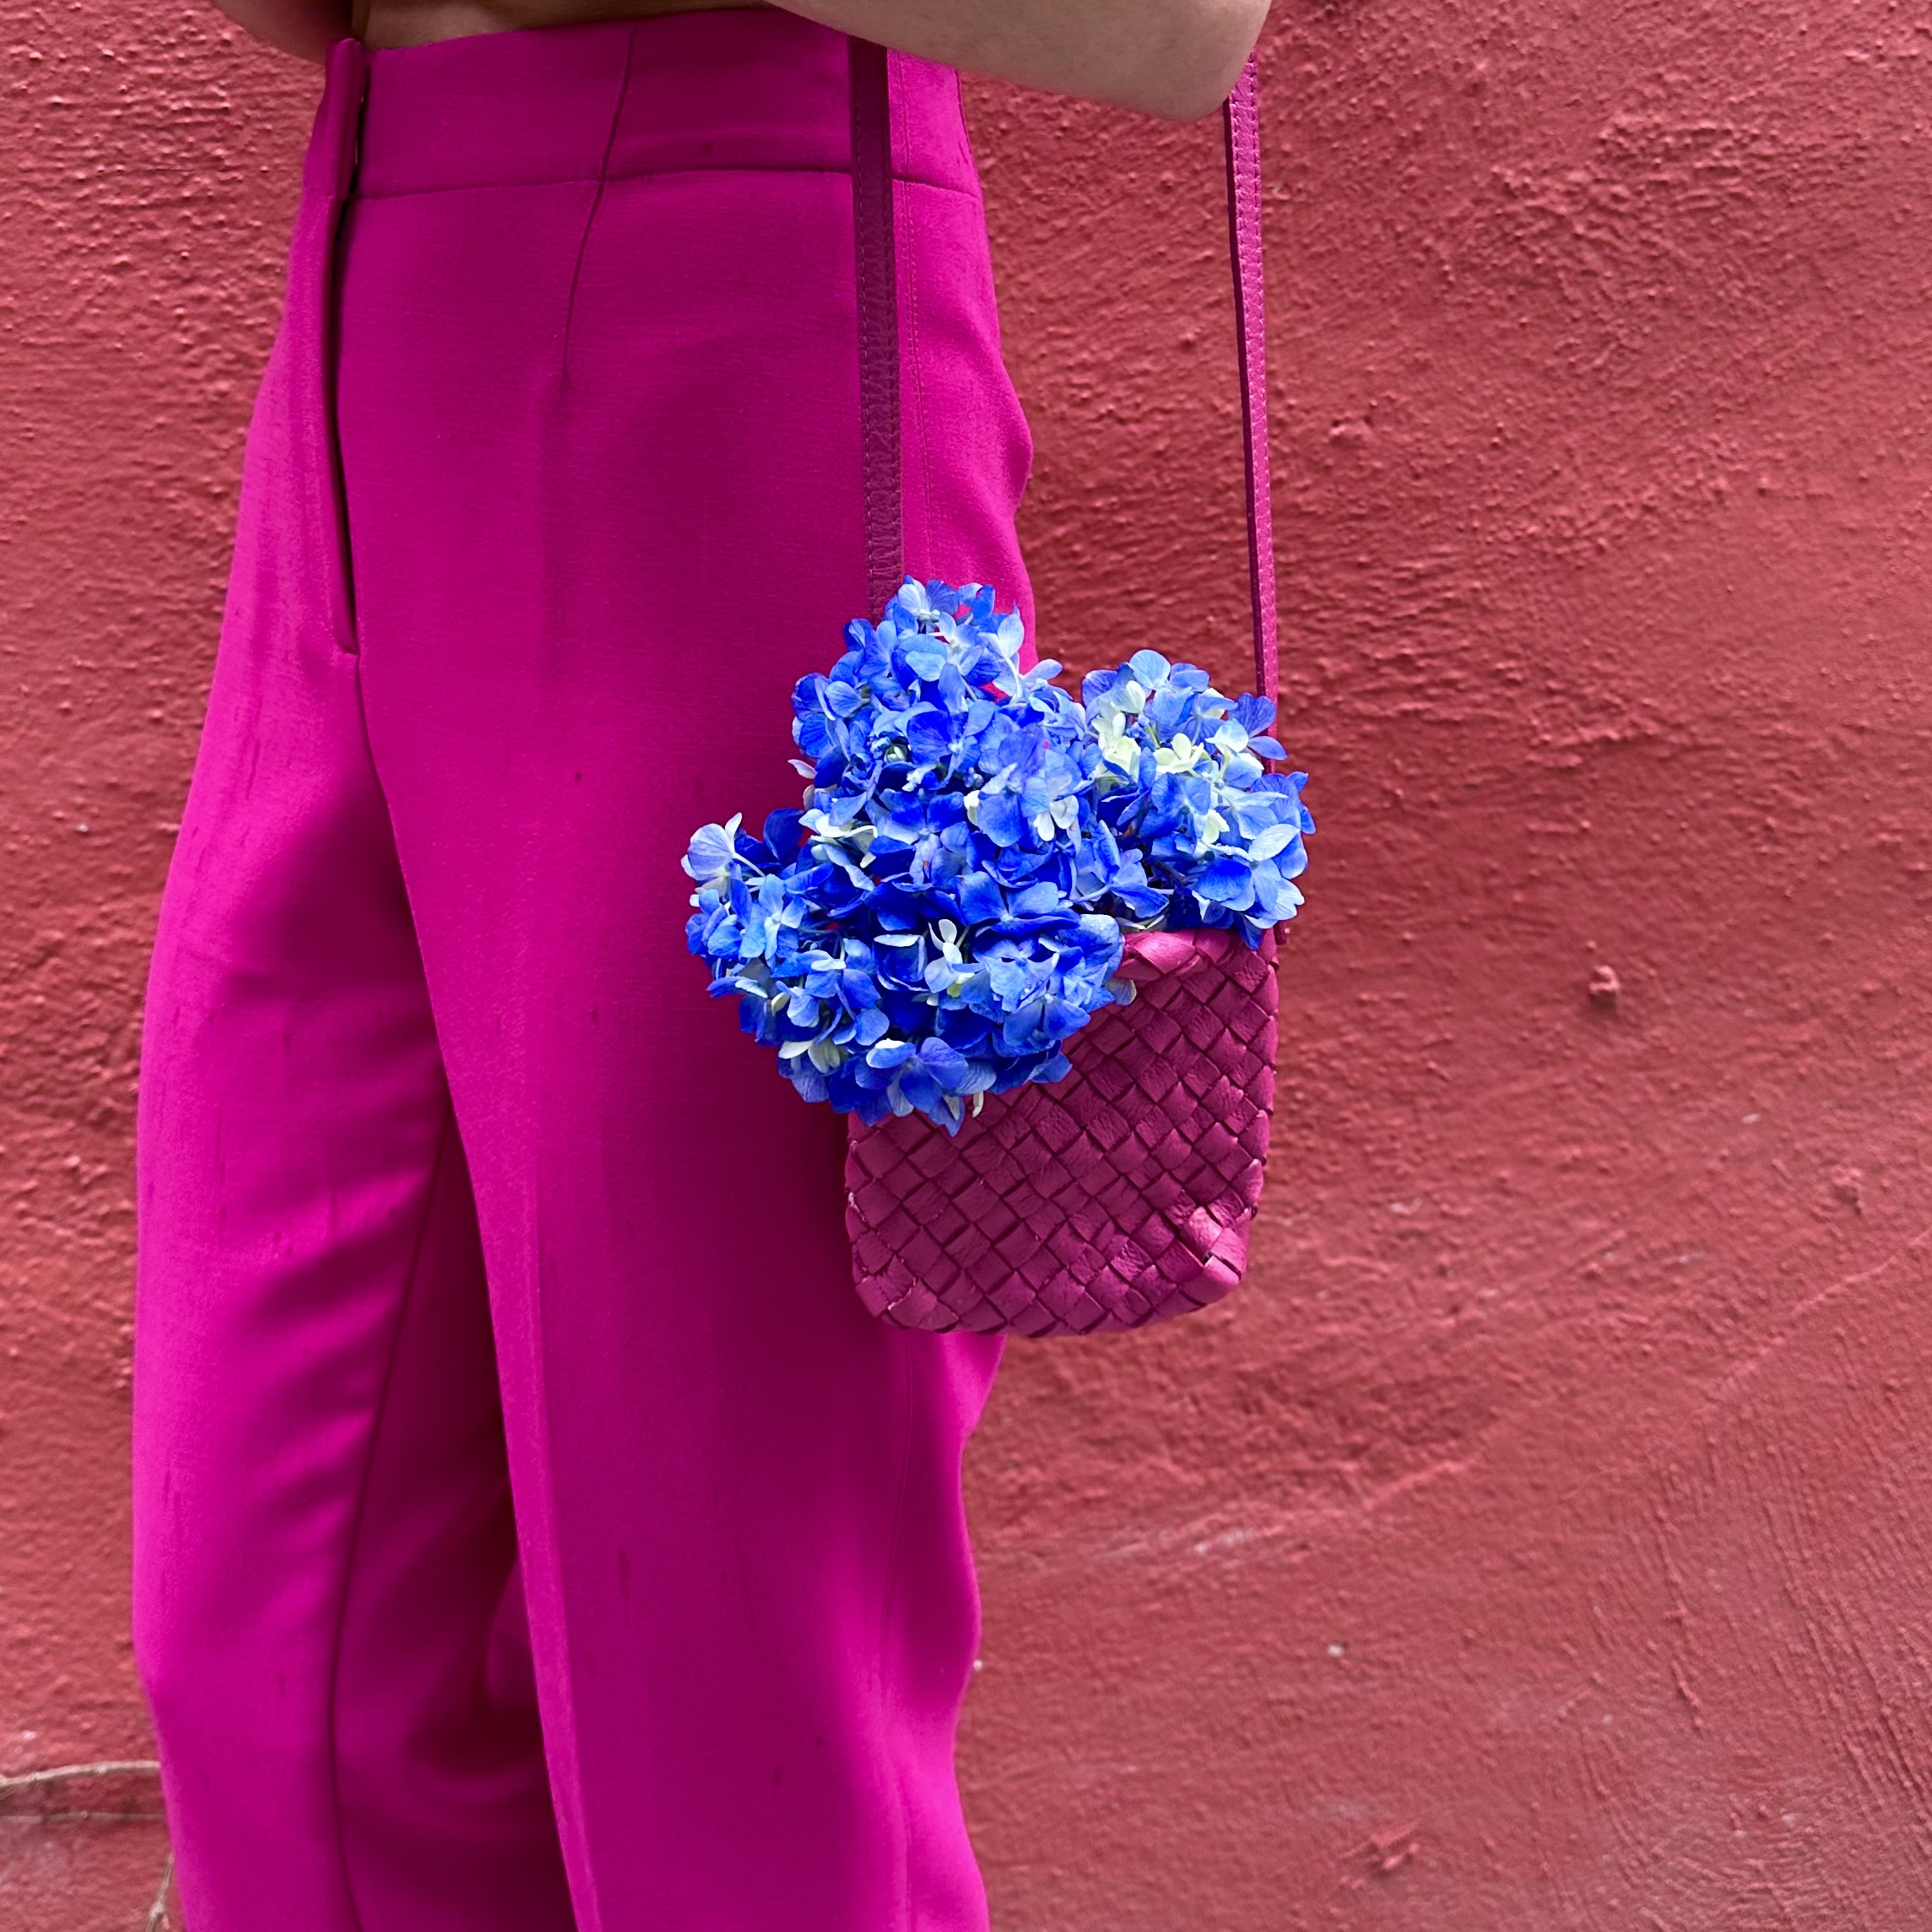 Art inspired fashion look with pink pants against a pink wall and a blue hydrangea sitting in the purse.  